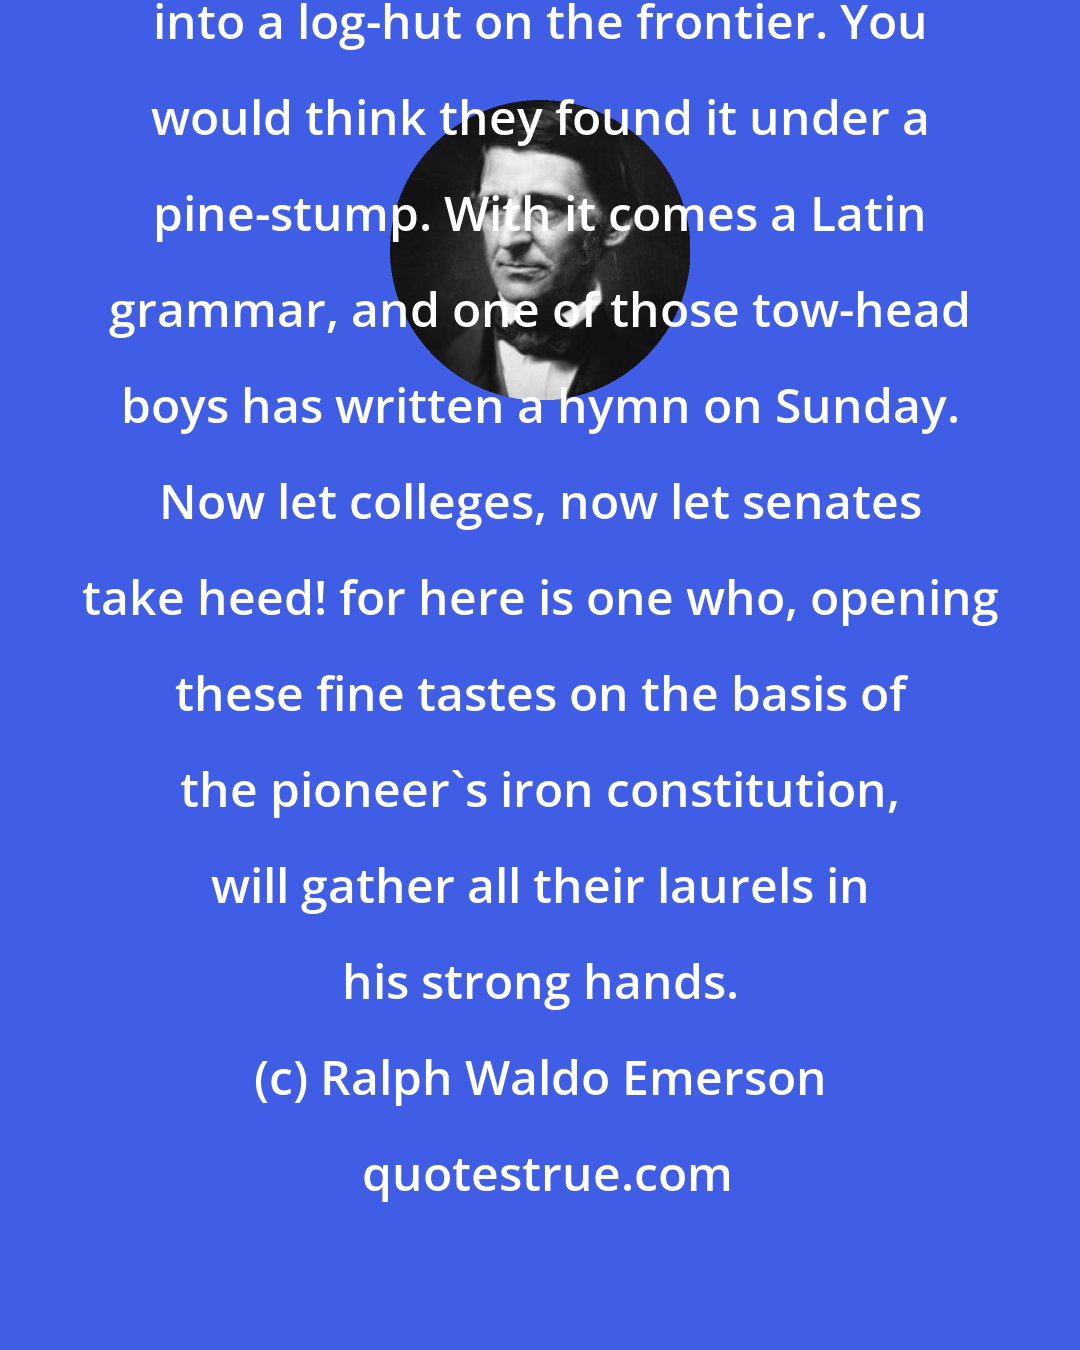 Ralph Waldo Emerson: It is wonderful how soon a piano gets into a log-hut on the frontier. You would think they found it under a pine-stump. With it comes a Latin grammar, and one of those tow-head boys has written a hymn on Sunday. Now let colleges, now let senates take heed! for here is one who, opening these fine tastes on the basis of the pioneer's iron constitution, will gather all their laurels in his strong hands.